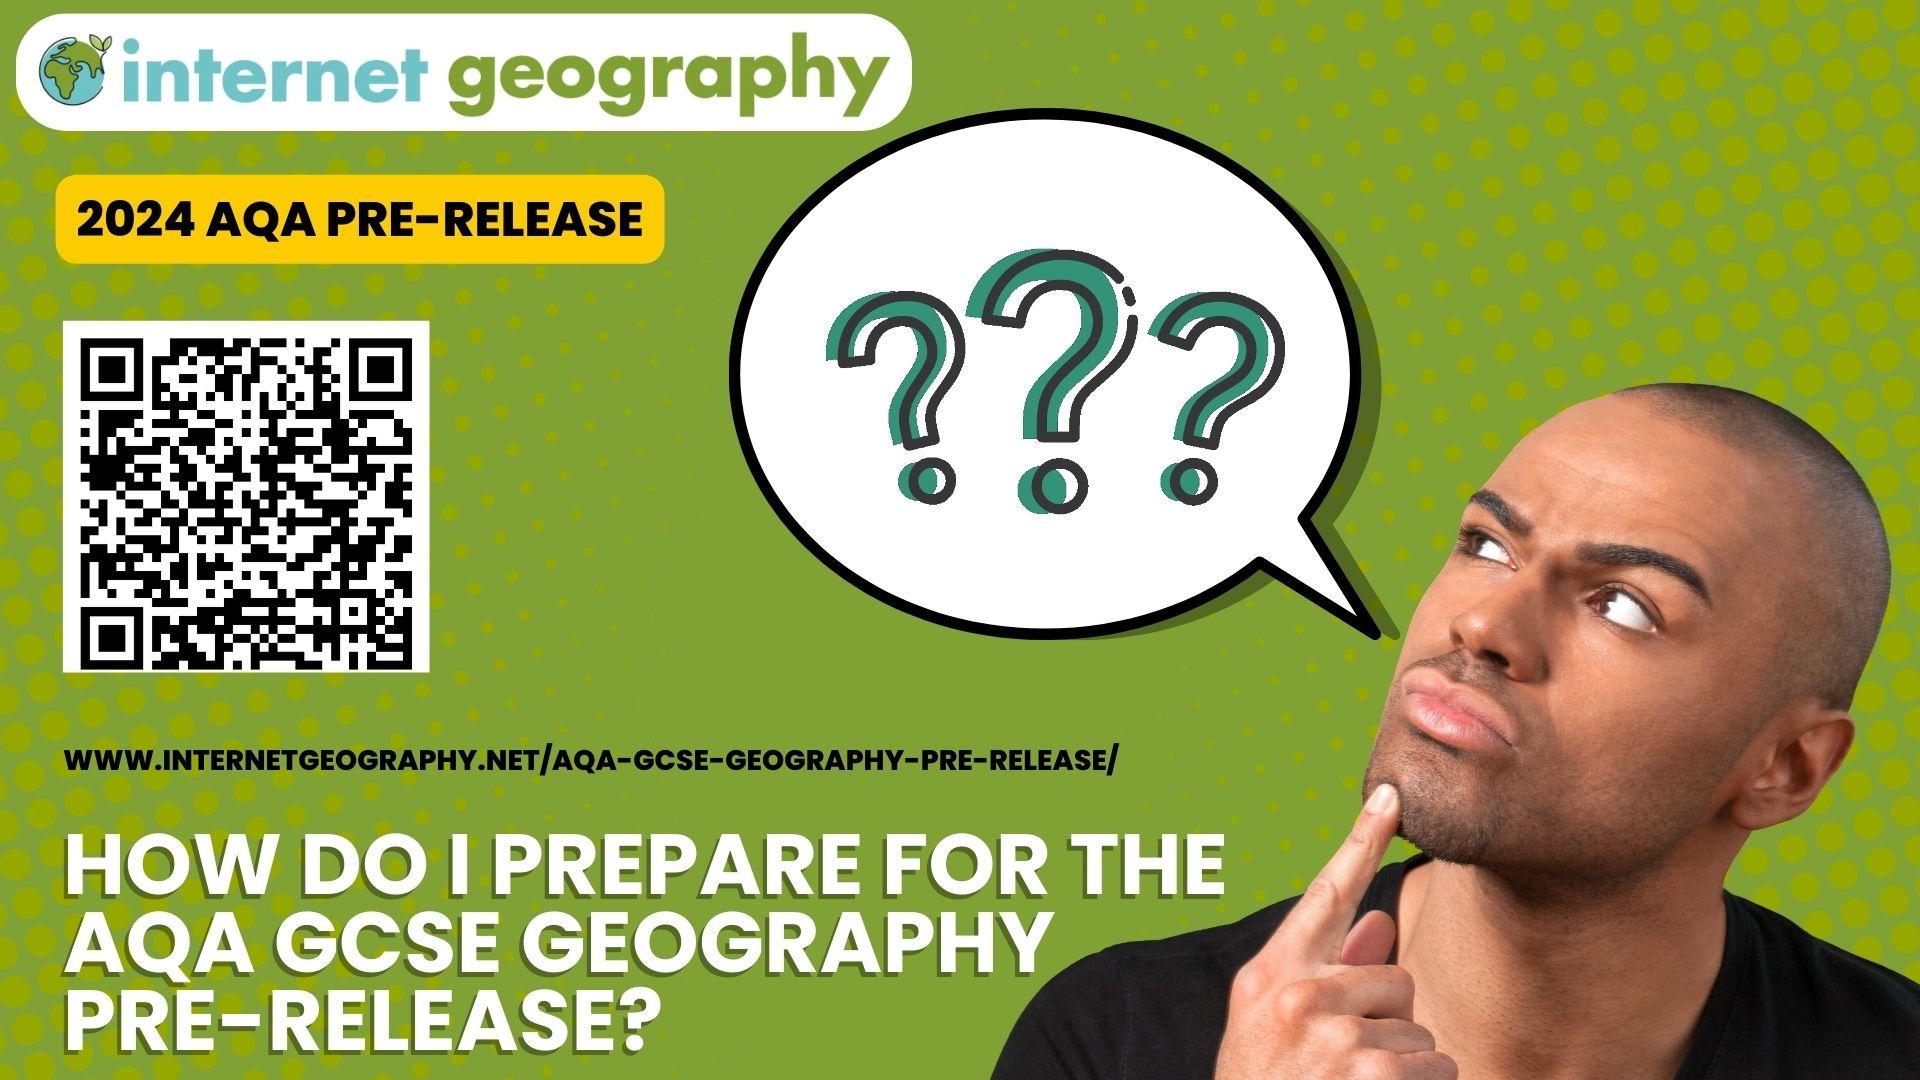 How do I prepare for the AQA GCSE Geography Pre-release